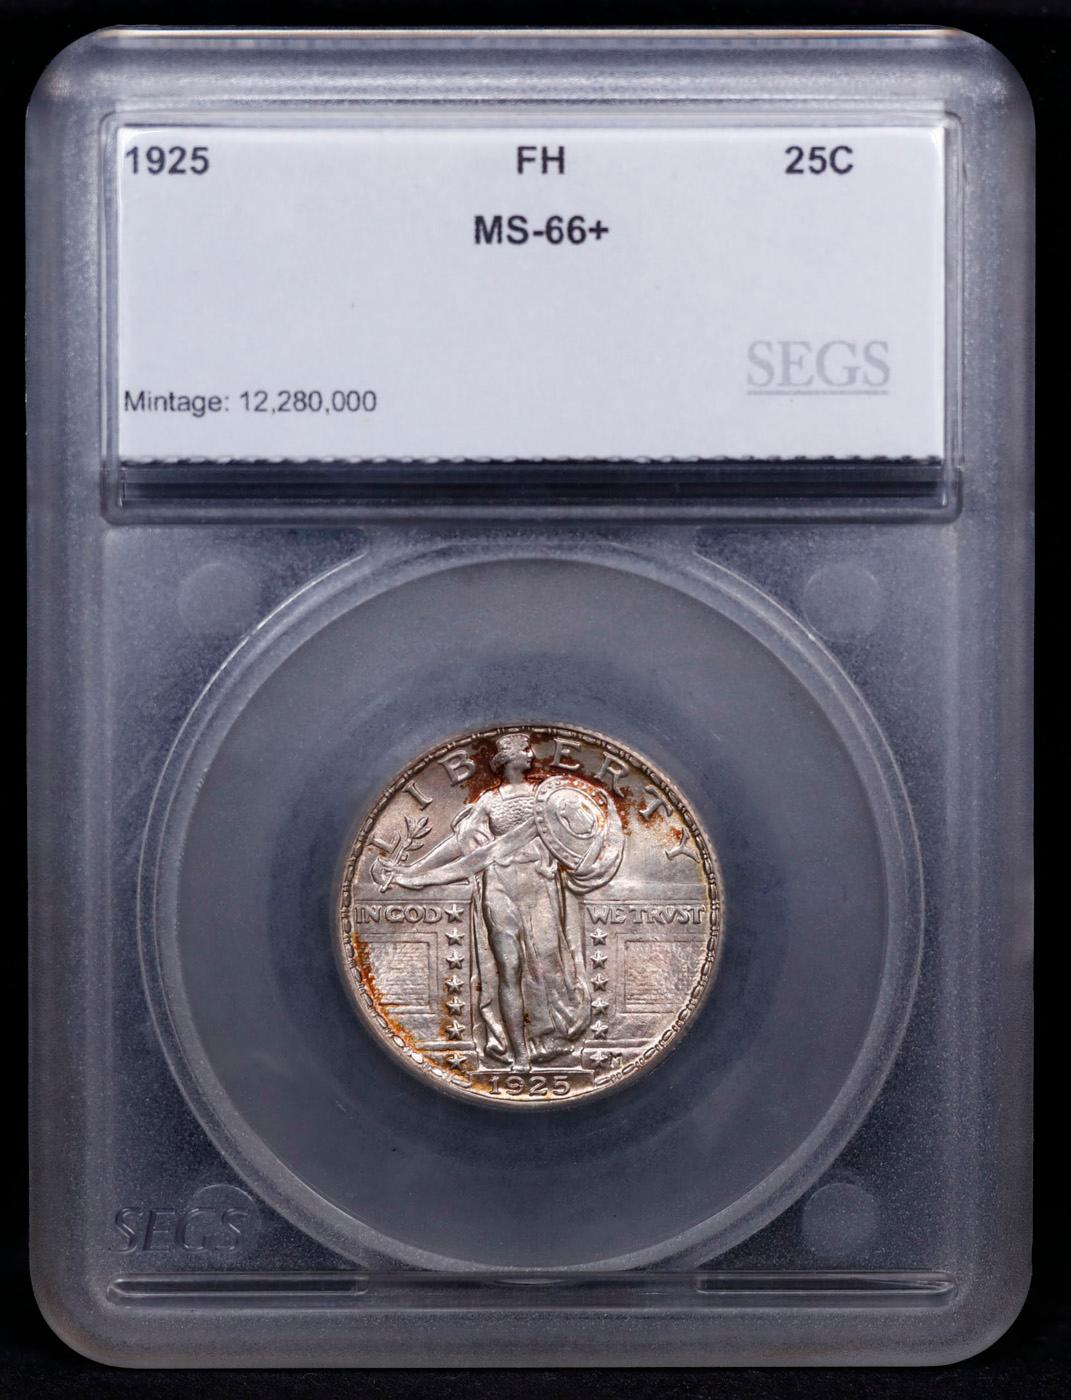 ***Auction Highlight*** 1925-p Standing Liberty Quarter Near Top Pop! 25c Graded ms66+ FH By SEGS (f